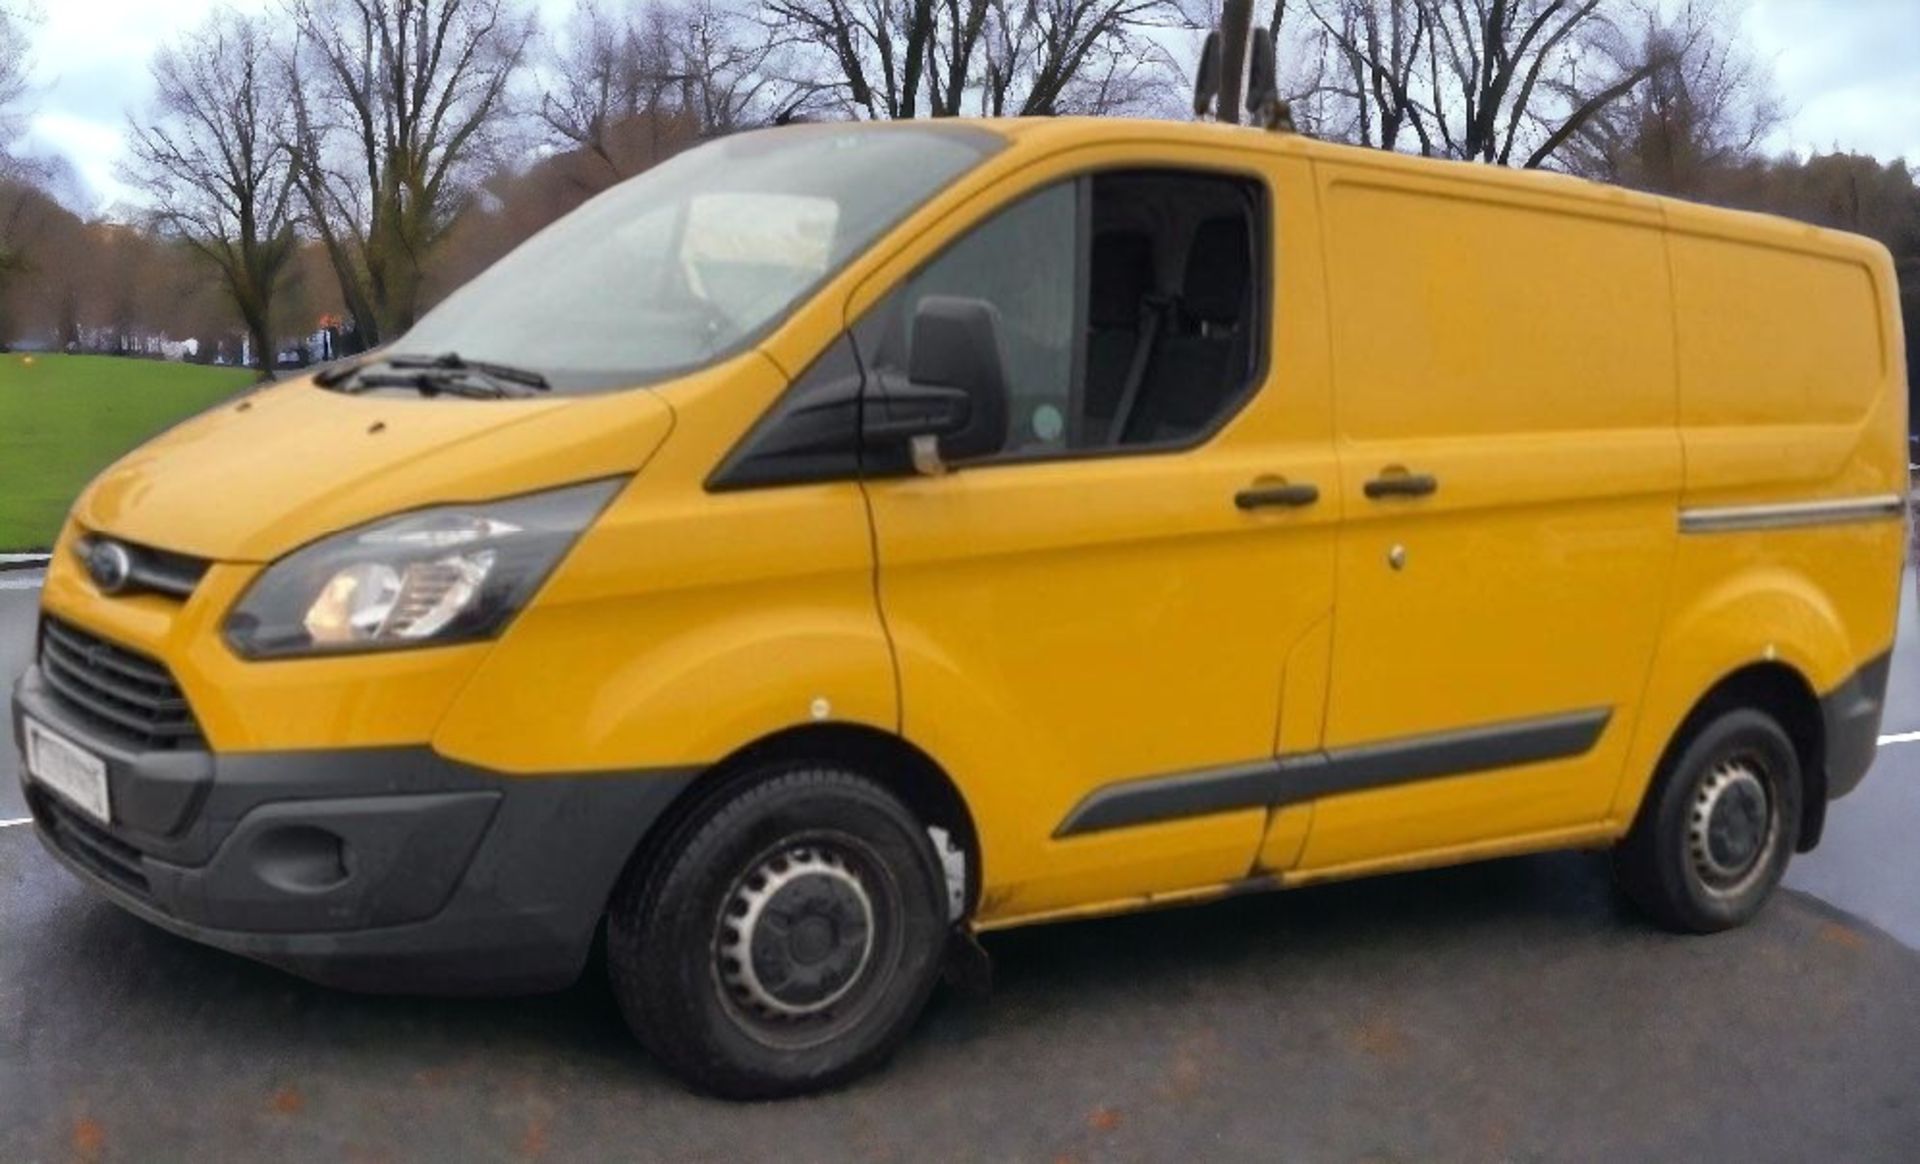 2015 FORD TRANSIT CUSTOM PANEL VAN - EXCEPTIONALLY MAINTAINED WORKHORSE - Image 8 of 14